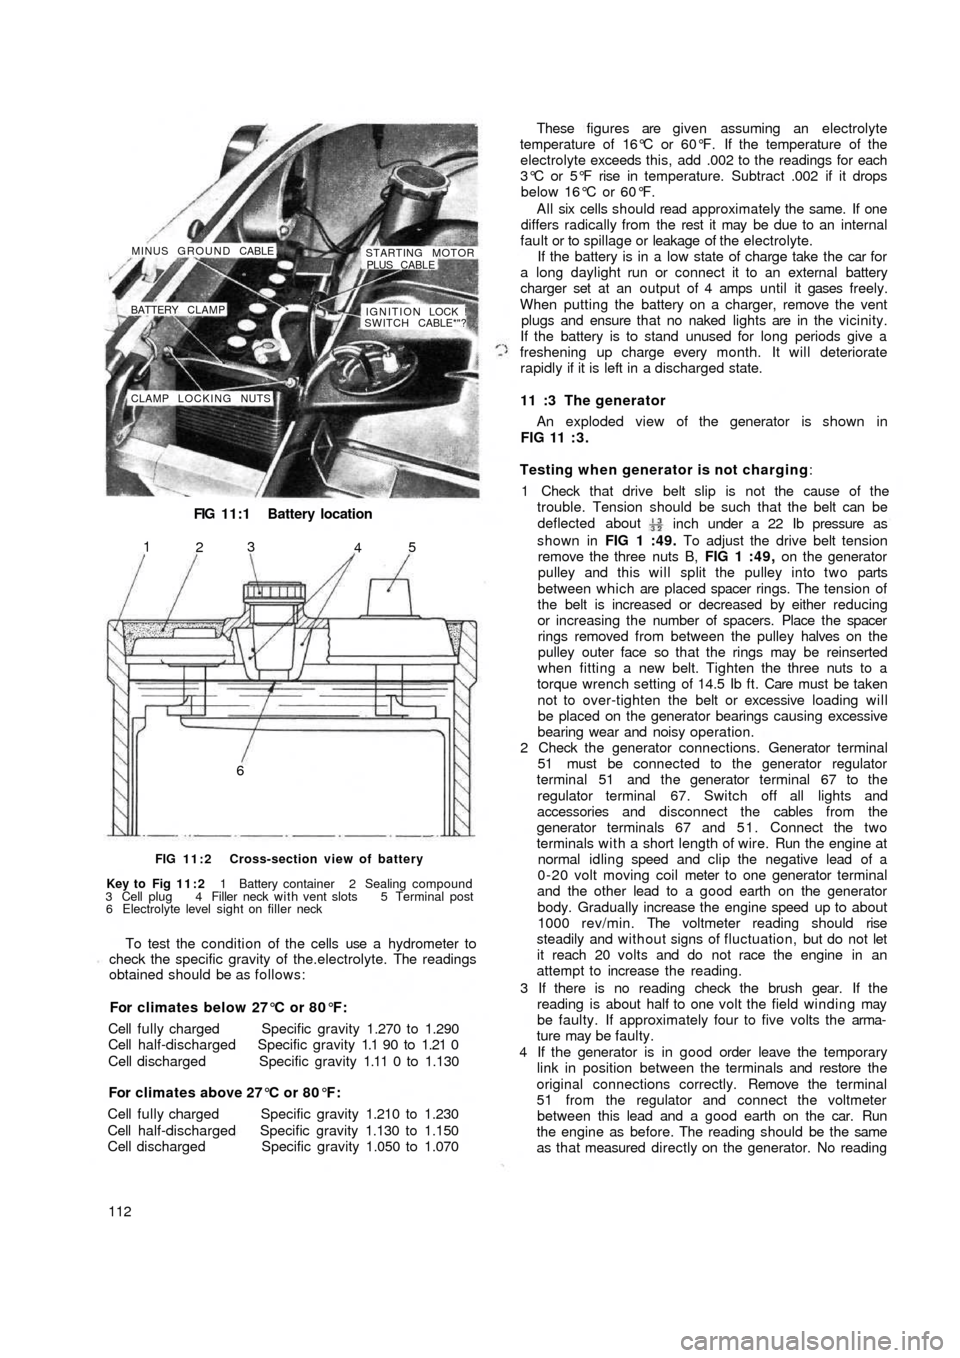 FIAT 500 1970 1.G Workshop Manual FIG 11:1 Battery location
CLAMP LOCKING NUTSIGNITION LOCK !
SWITCH CABLE*"? BATTERY CLAMP MINUS GROUND CABLE
STARTING MOTOR
PLUS CABLE
65
4 3
2 1
FIG 11:2 Cross-section view of battery
Key to  Fig  11